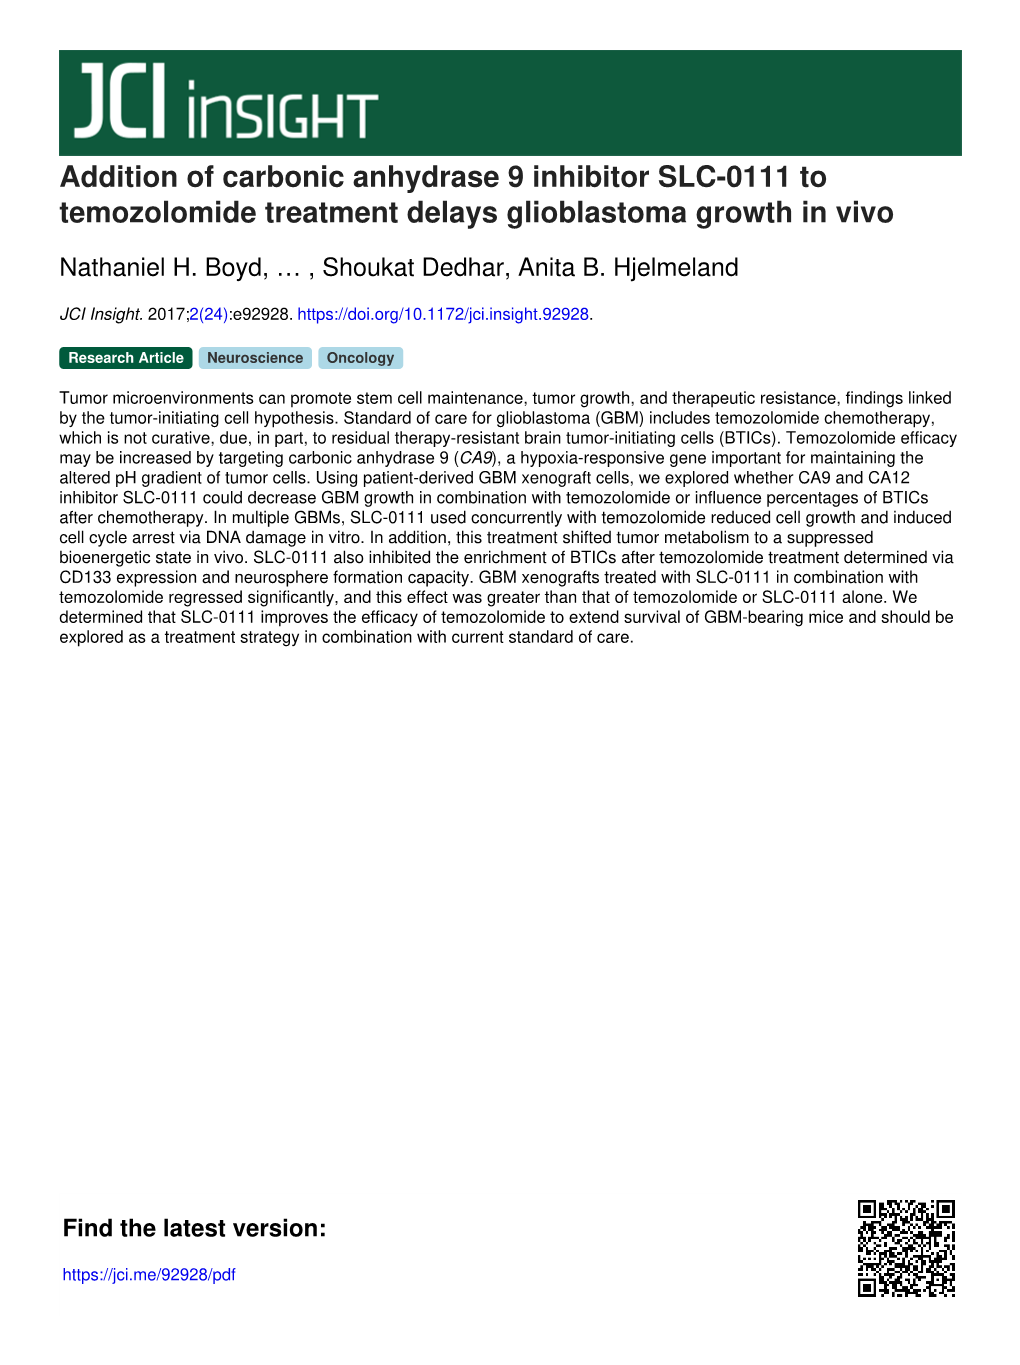 Addition of Carbonic Anhydrase 9 Inhibitor SLC-0111 to Temozolomide Treatment Delays Glioblastoma Growth in Vivo